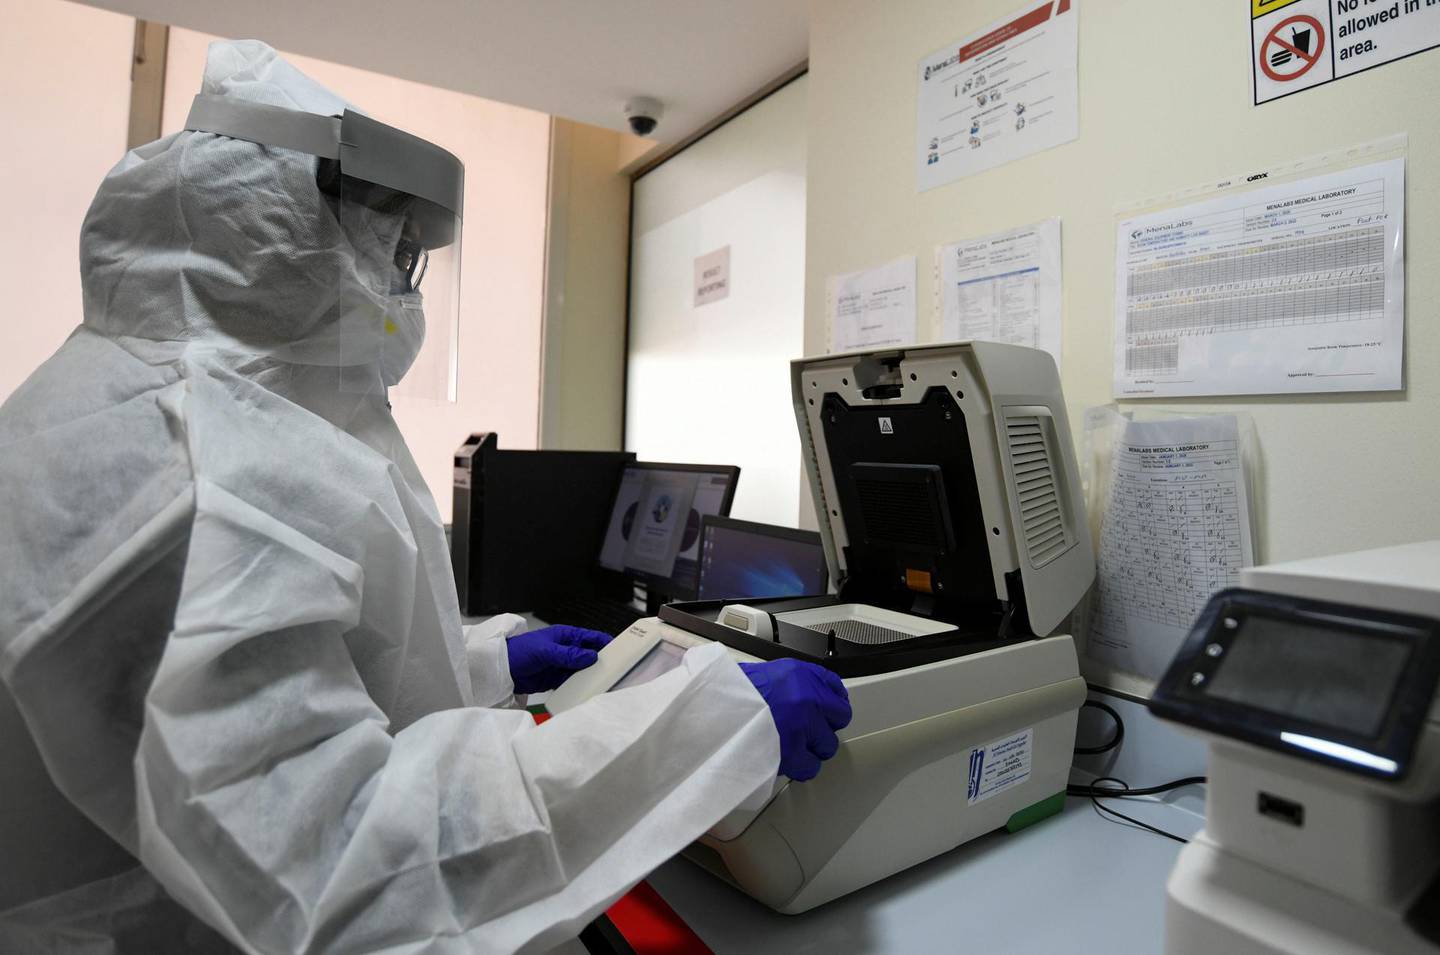 Abu Dhabi, United Arab Emirates - Lab technician wearing a protective suit and face shield carries out PCR testing at MenaLabs Medical Laboratory in Abu Dhabi. Khushnum Bhandari for The National